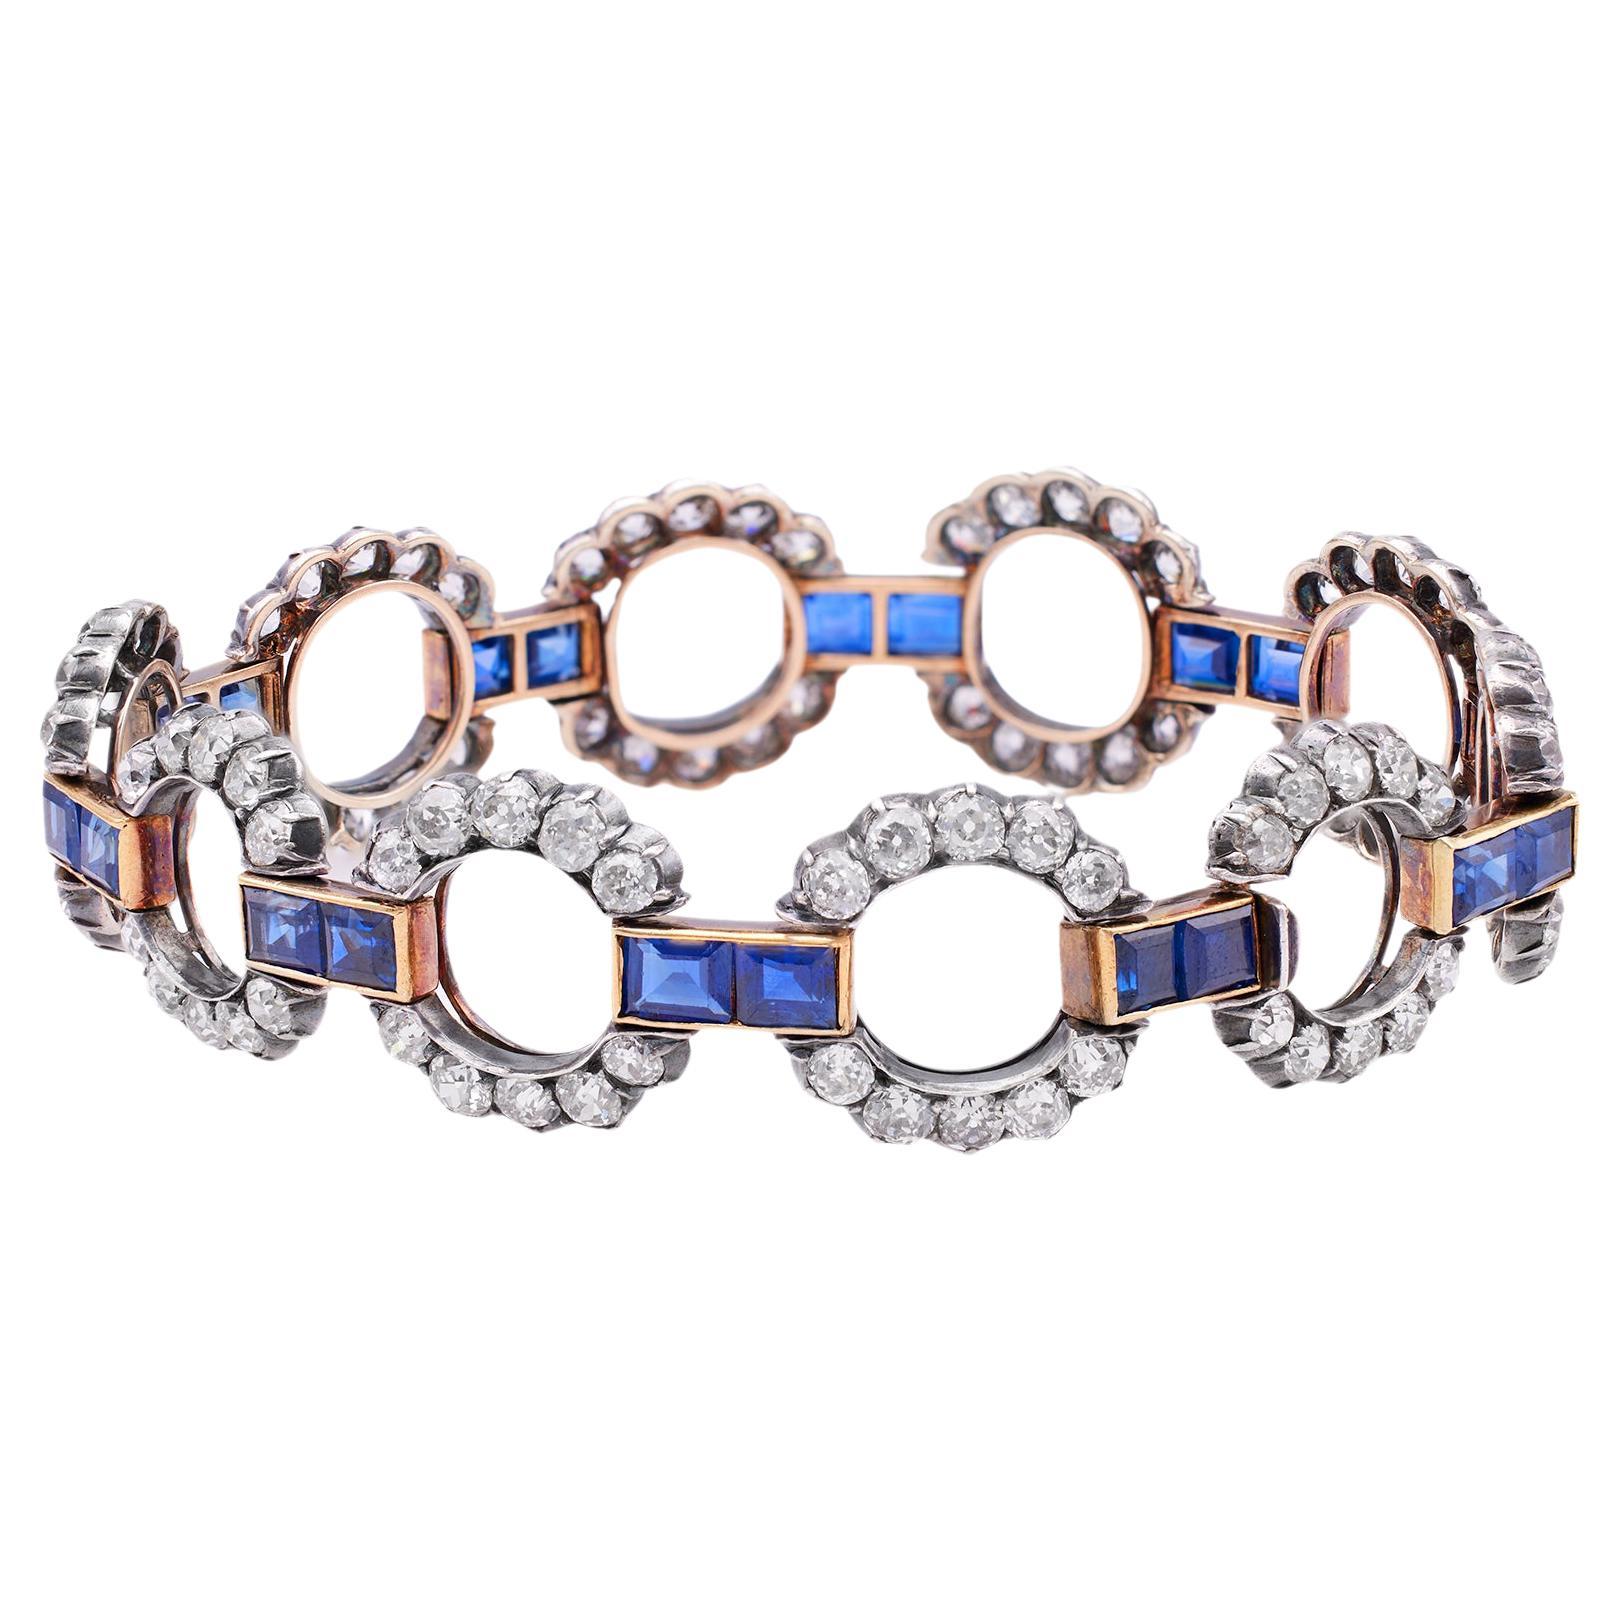 Antique French Diamond and Sapphire Silver 14k Yellow Gold Link Bracelet